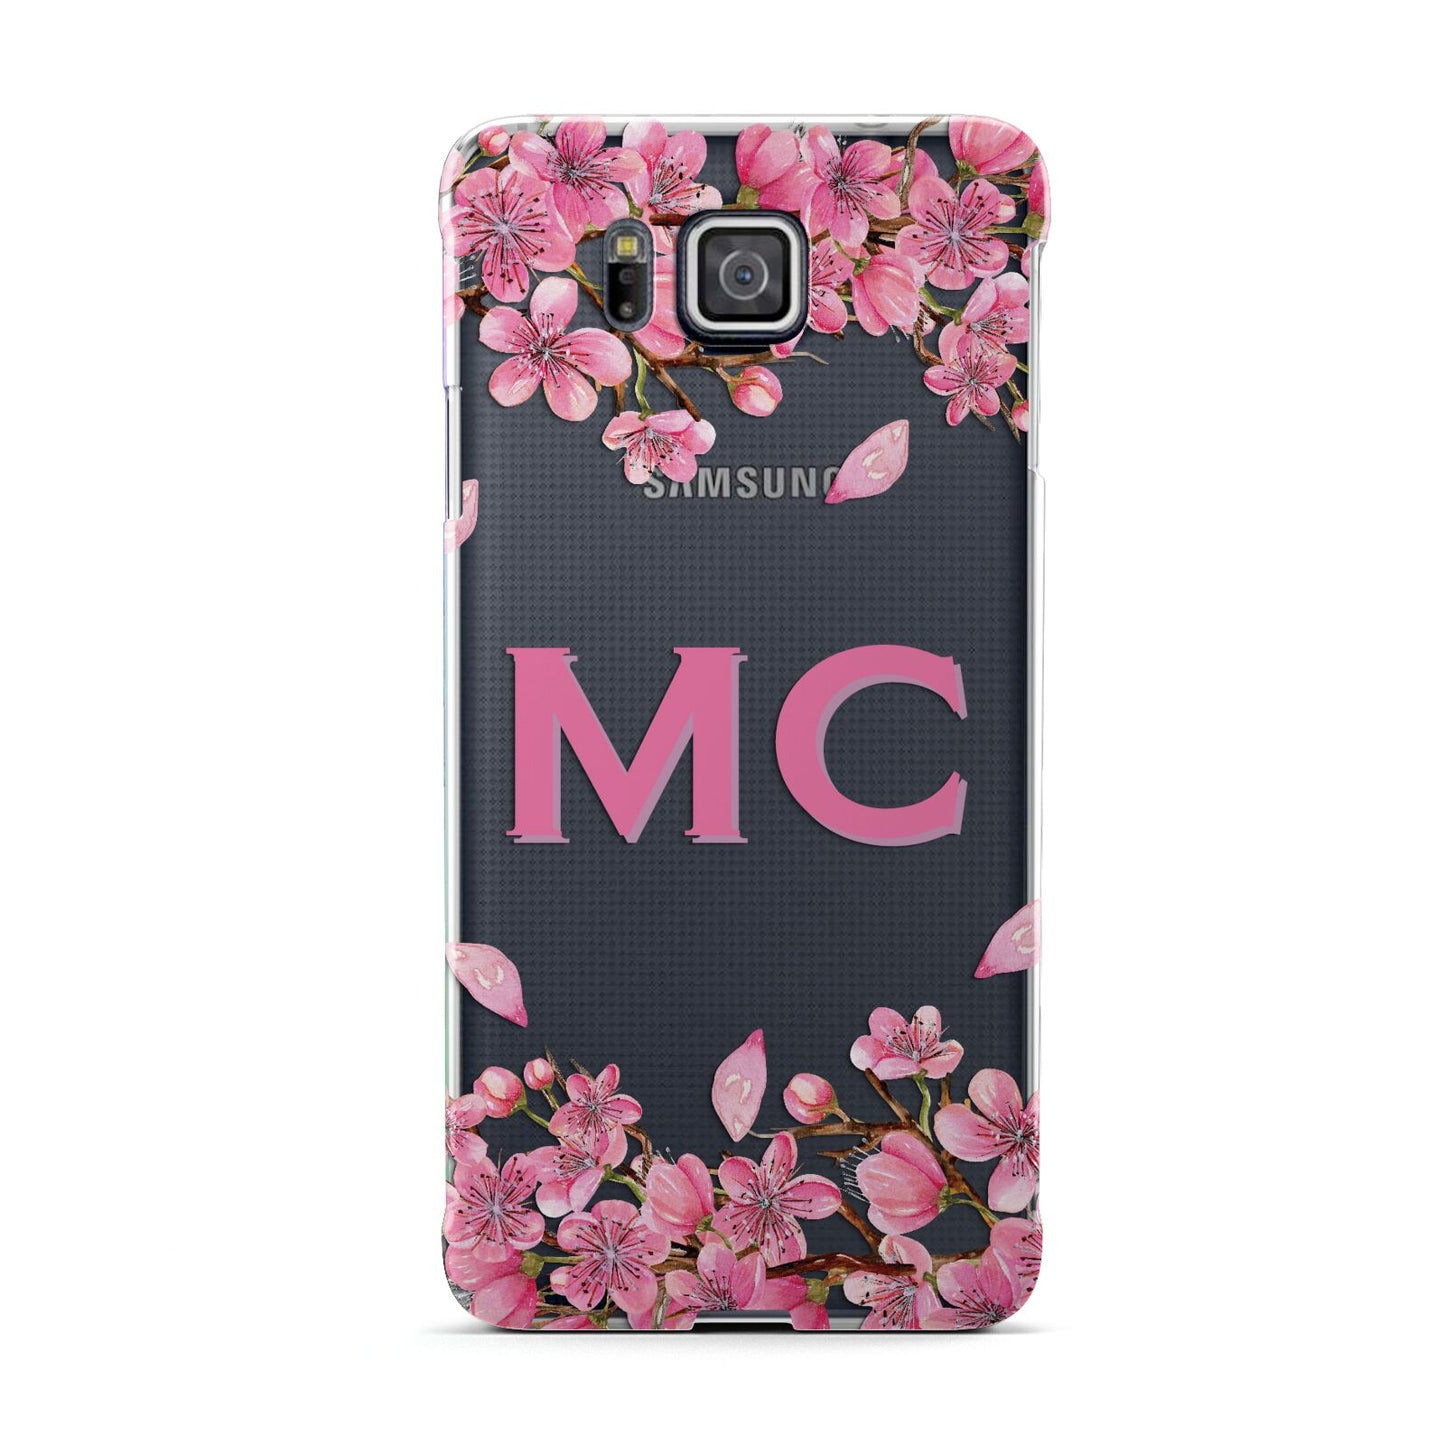 Personalised Vibrant Cherry Blossom Pink Samsung Galaxy Alpha Case